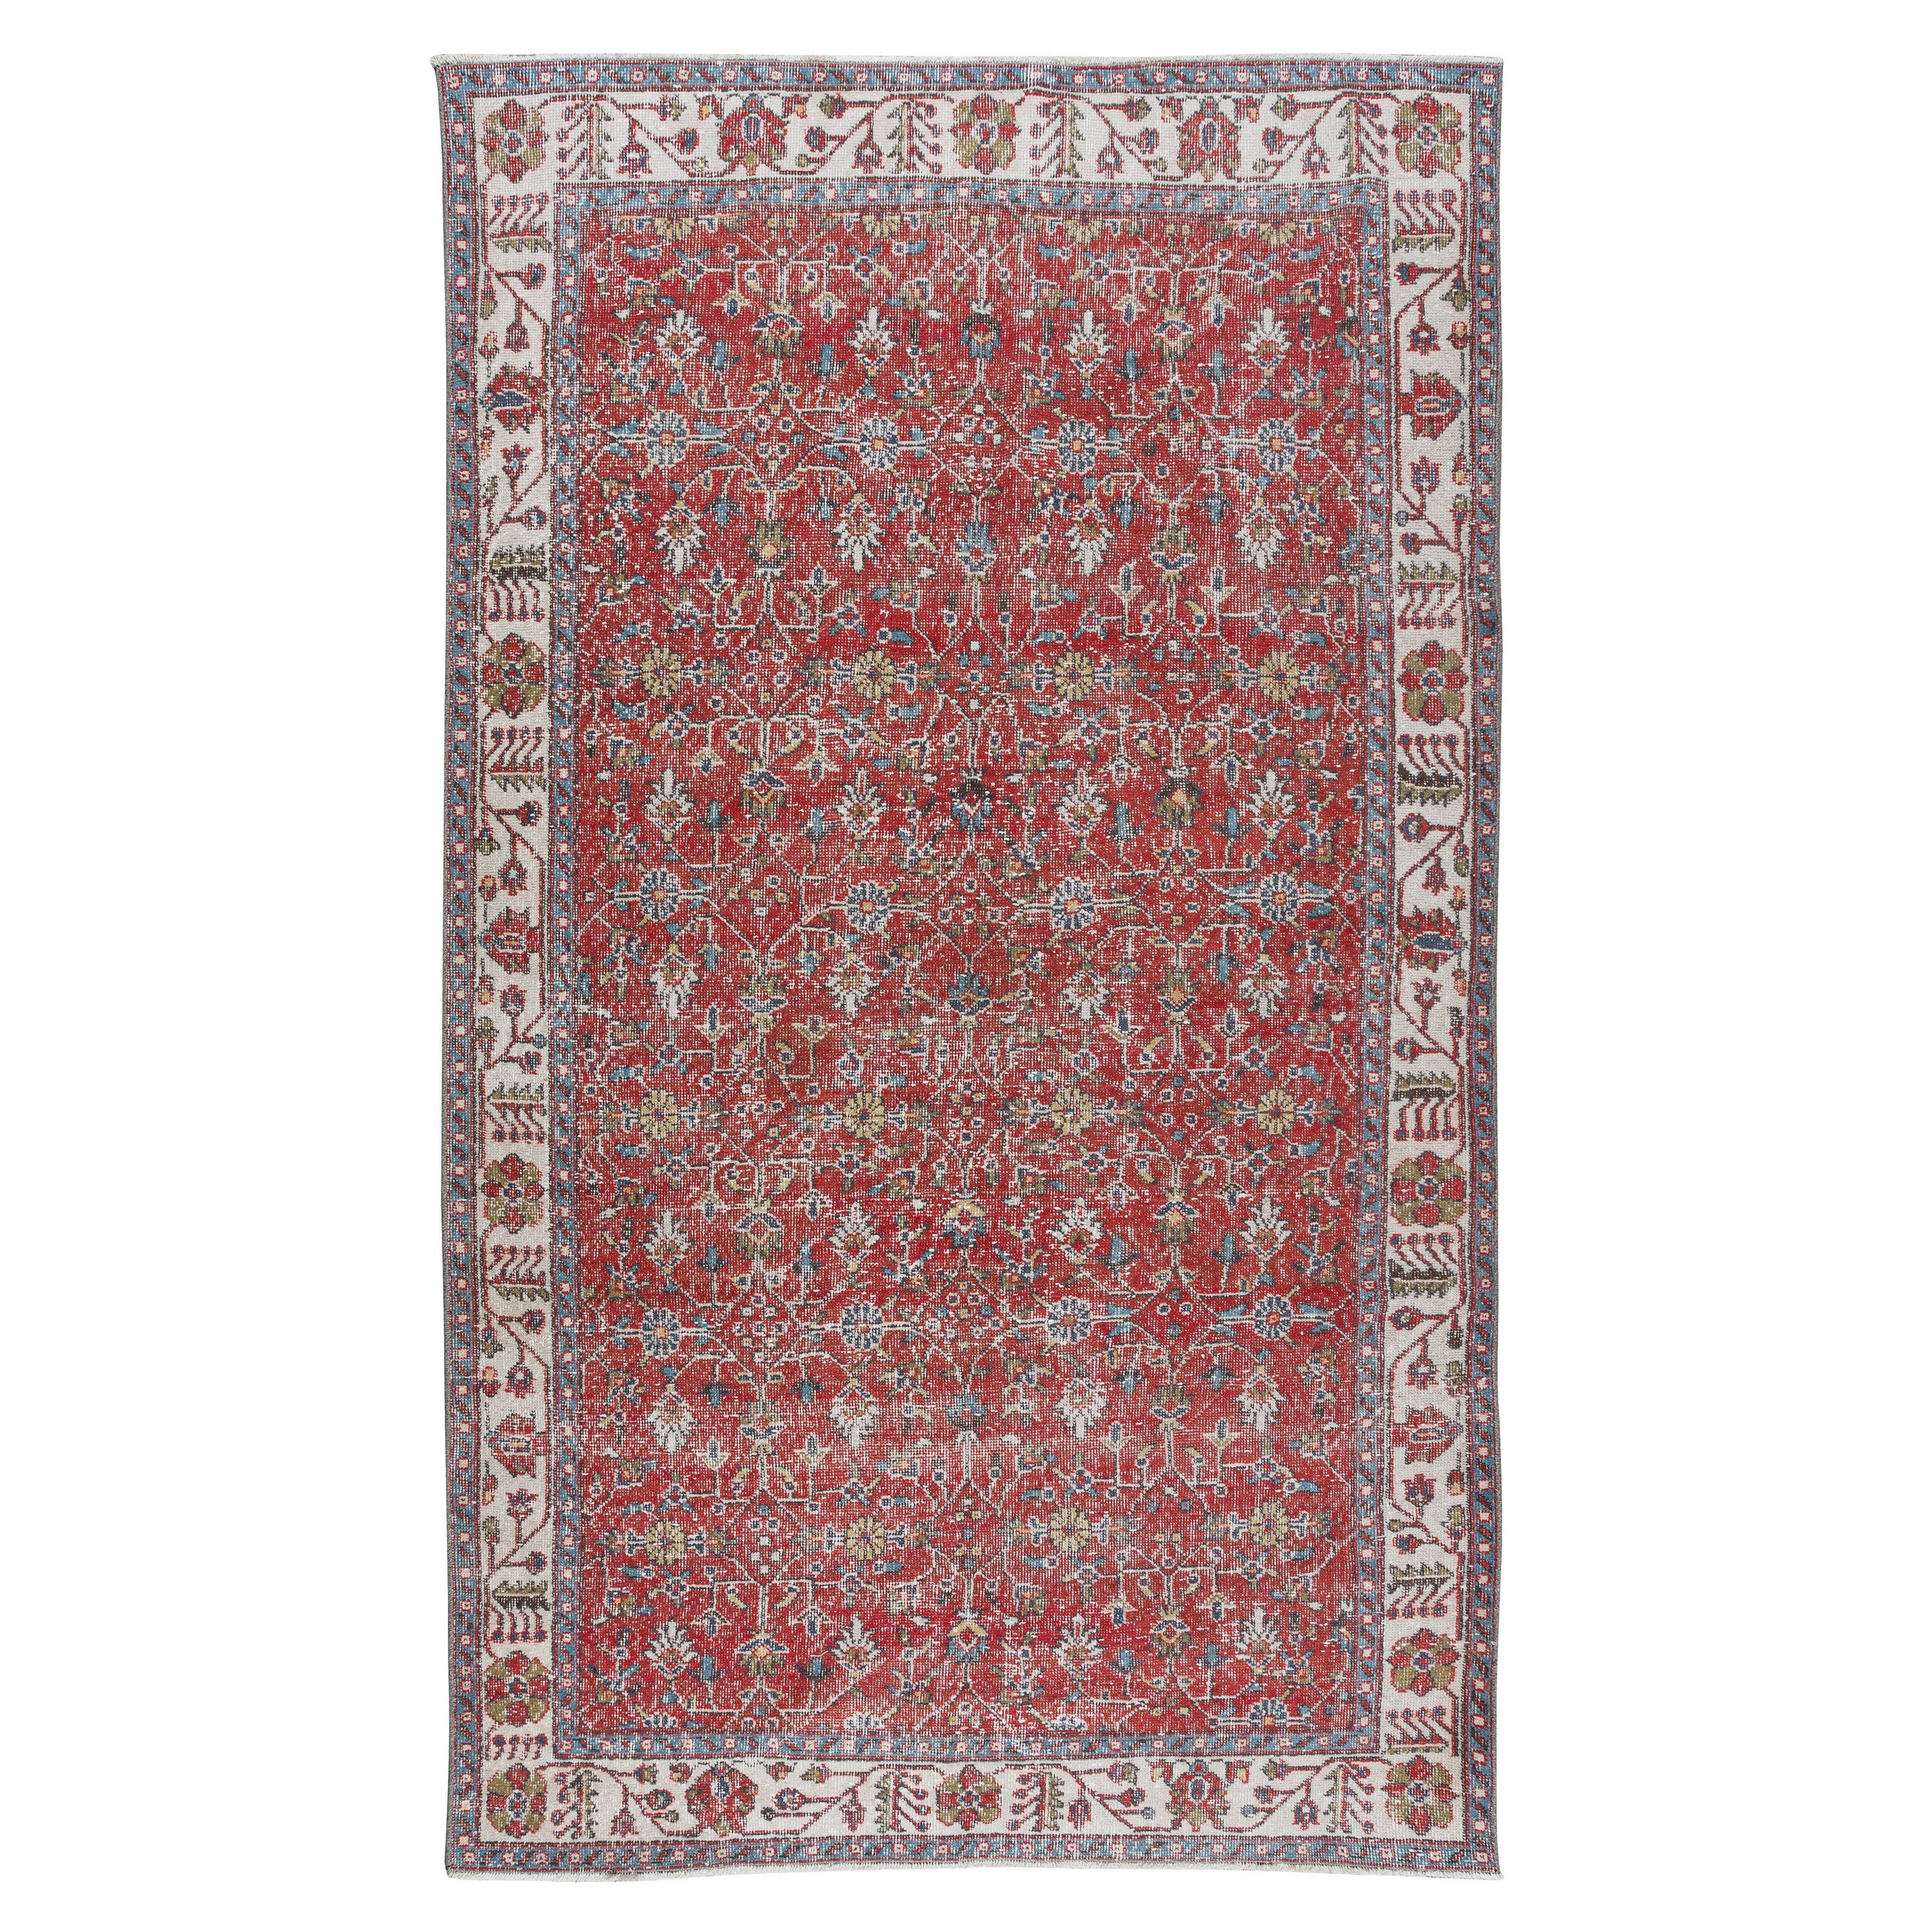 5.7x9.7 Ft Vintage Floral Hand Knotted Anatolian Wool Area Rug in Red & Beige